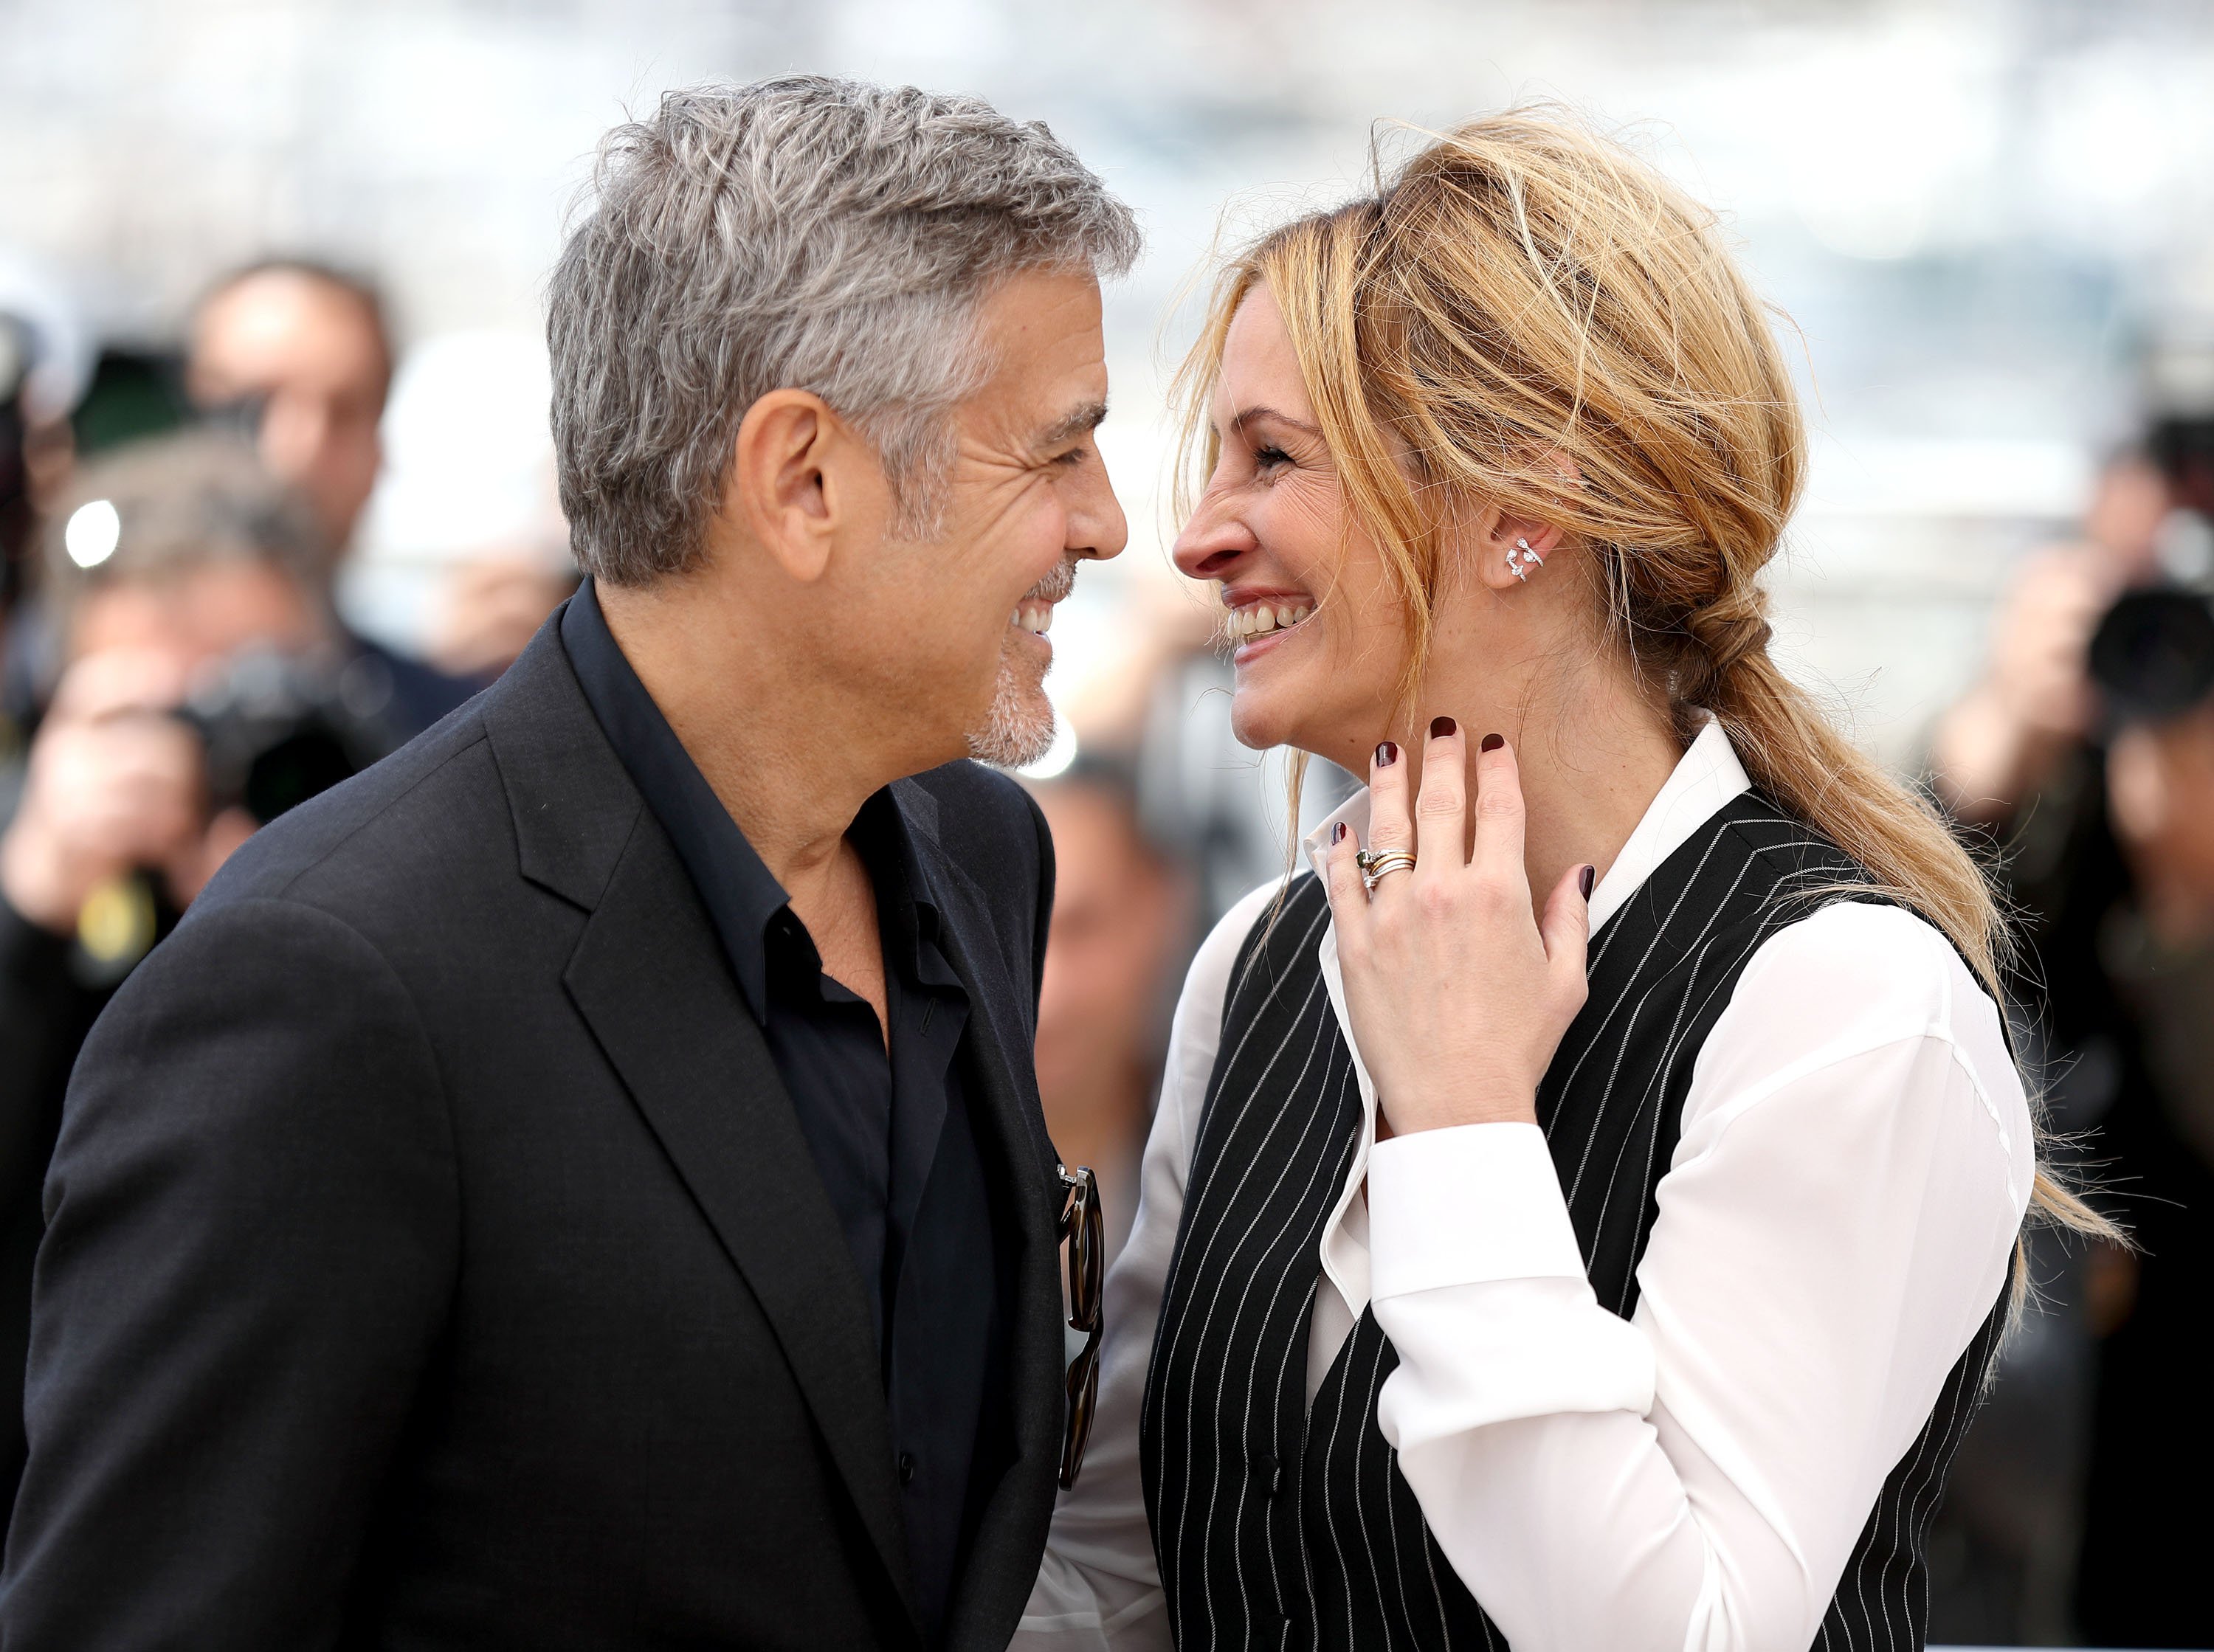 George Clooney and Julia Roberts attend the 'Money Monster' photocall during the 69th annual Cannes Film Festival at the Palais des Festivals on May 12, 2016 in Cannes, France. | Source: Getty Images